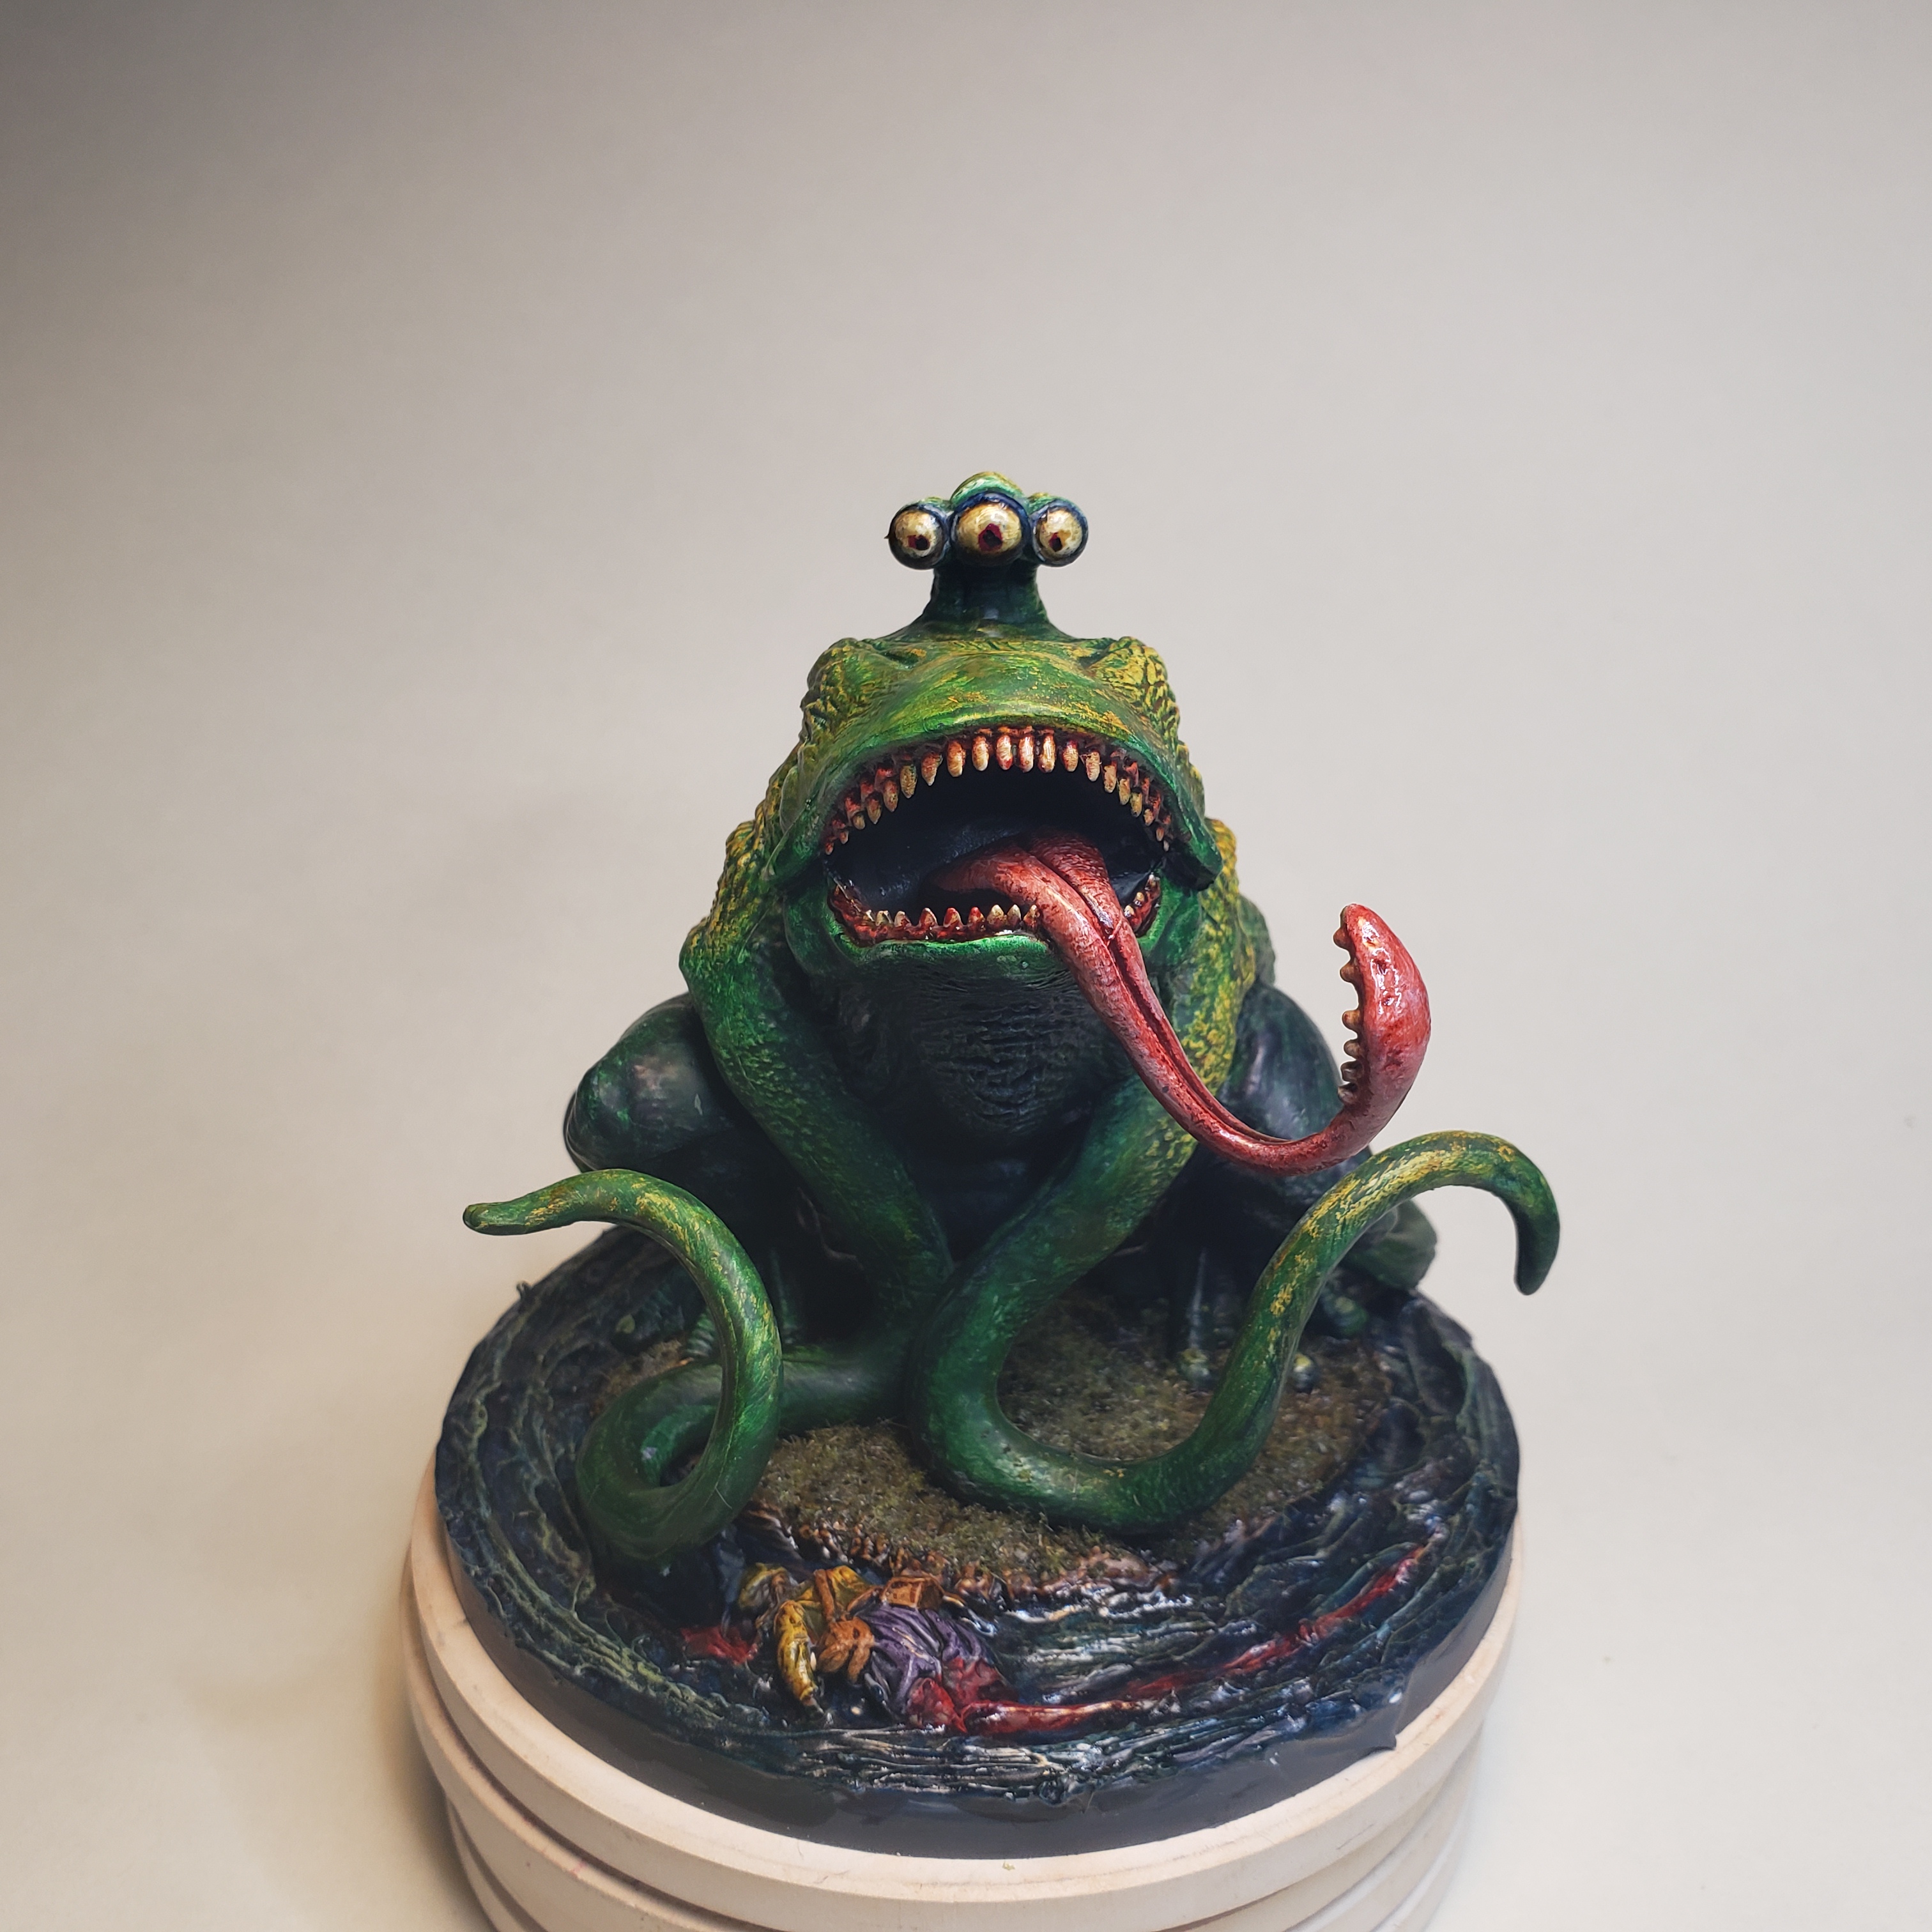 A photo of the finished Froghemoth model